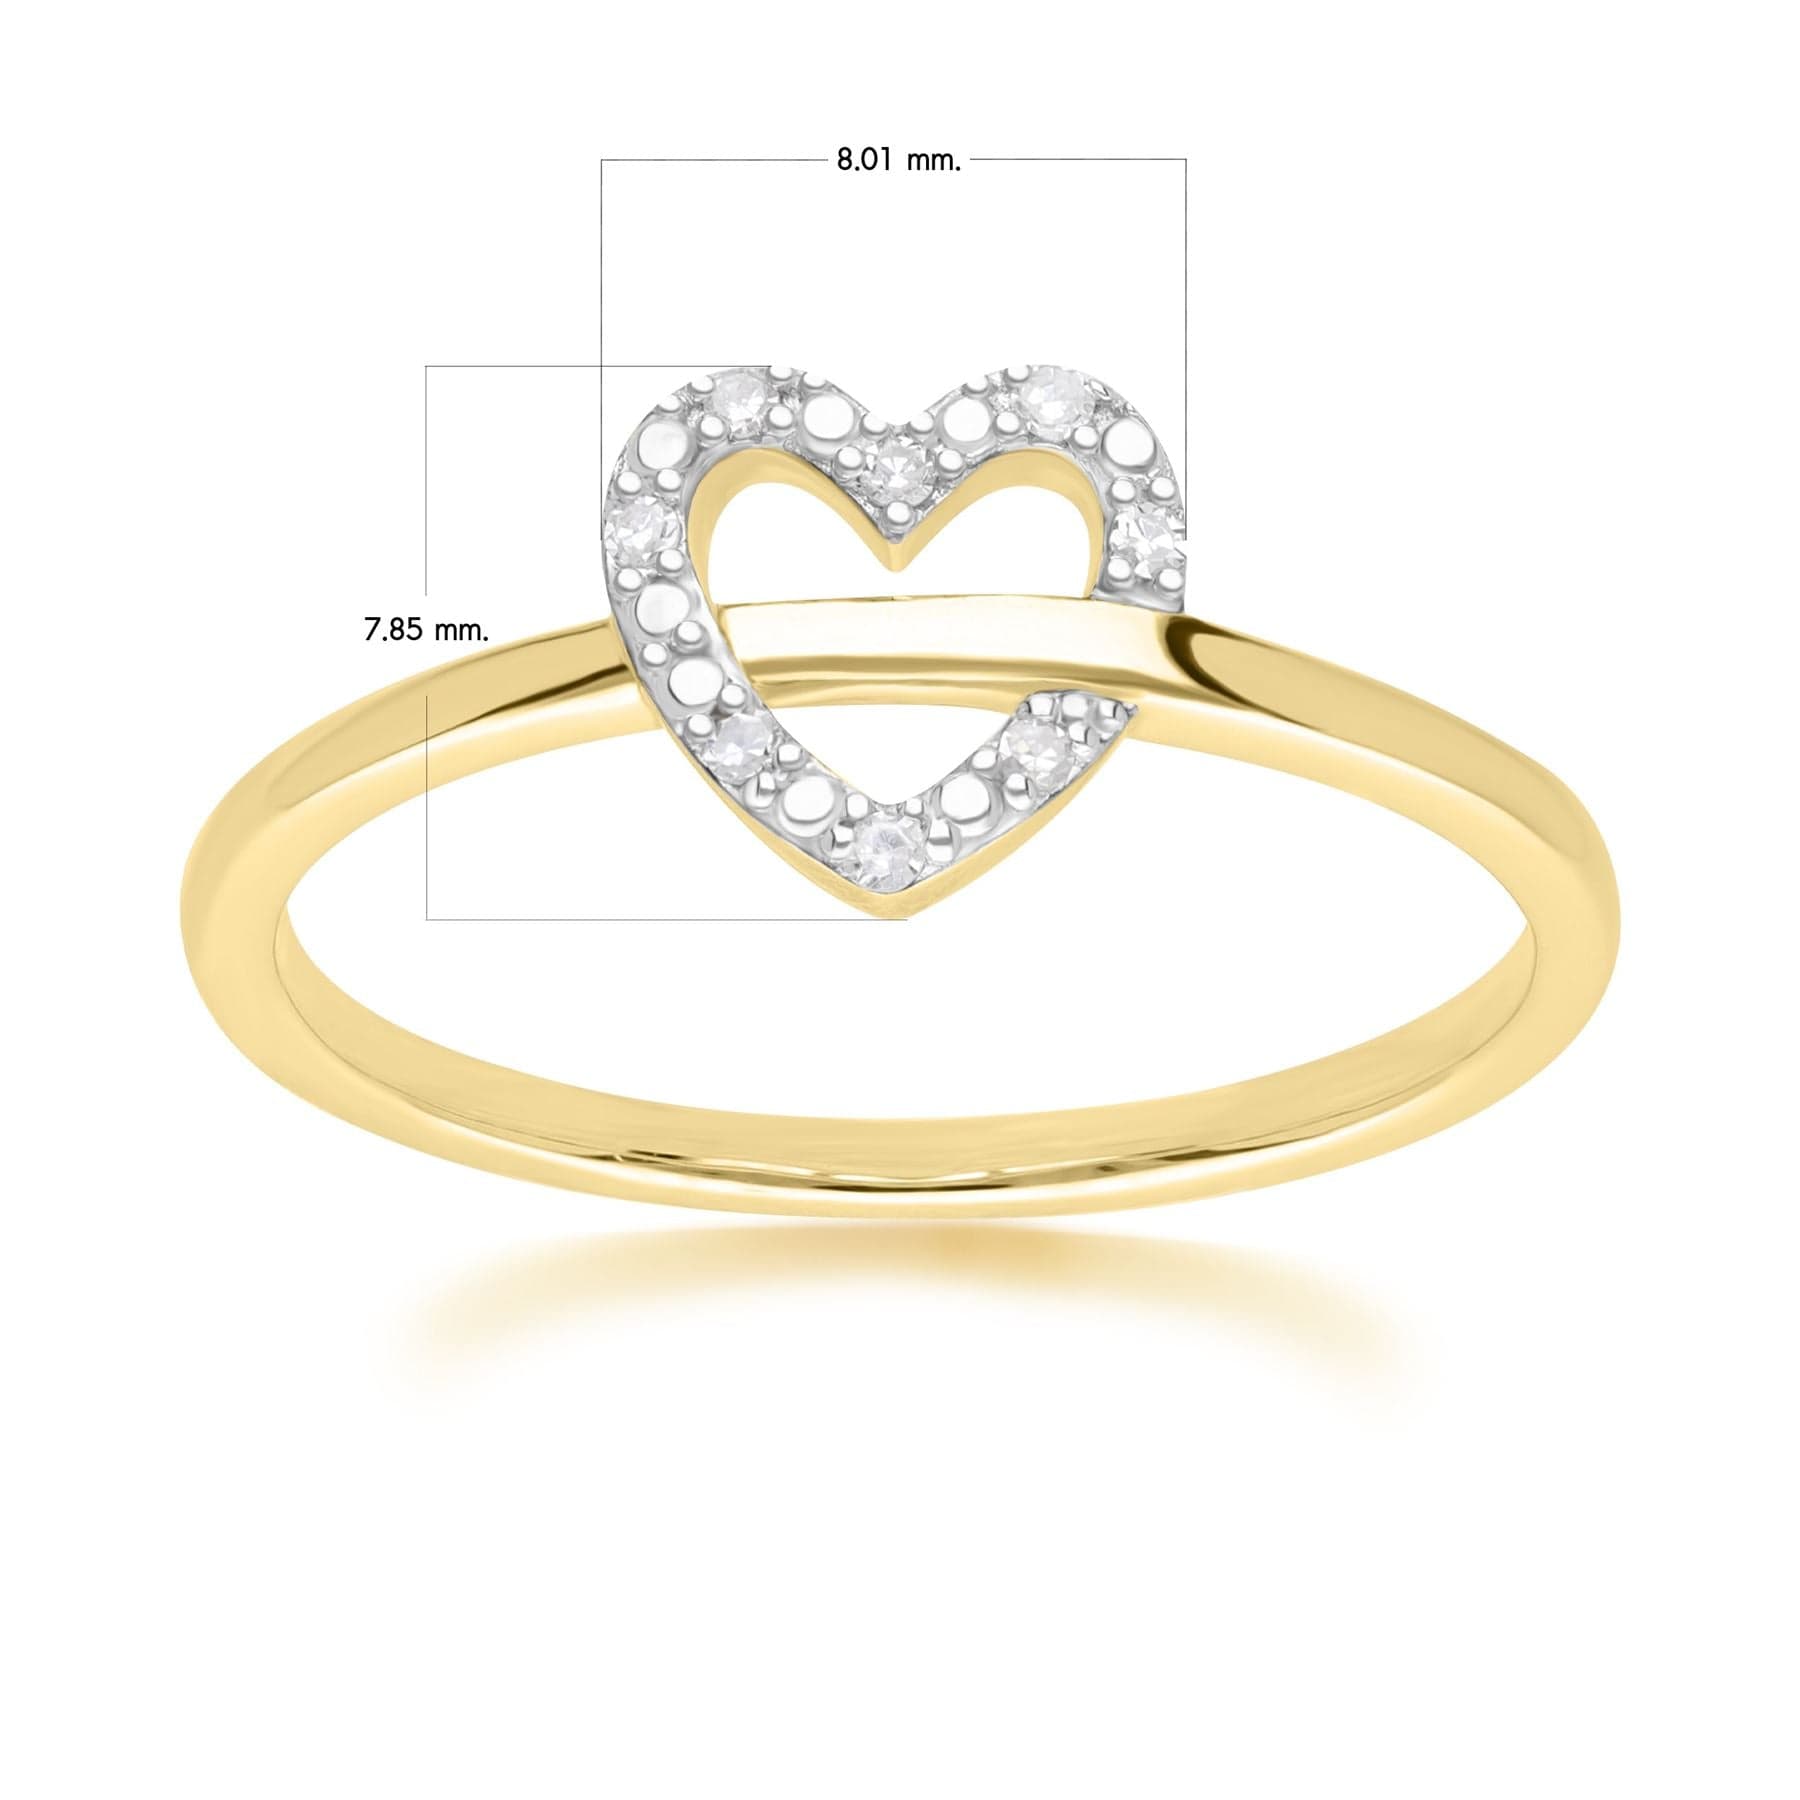 191R0934019 Diamond Love Heart Ring in 9ct Yellow Gold Dimensions